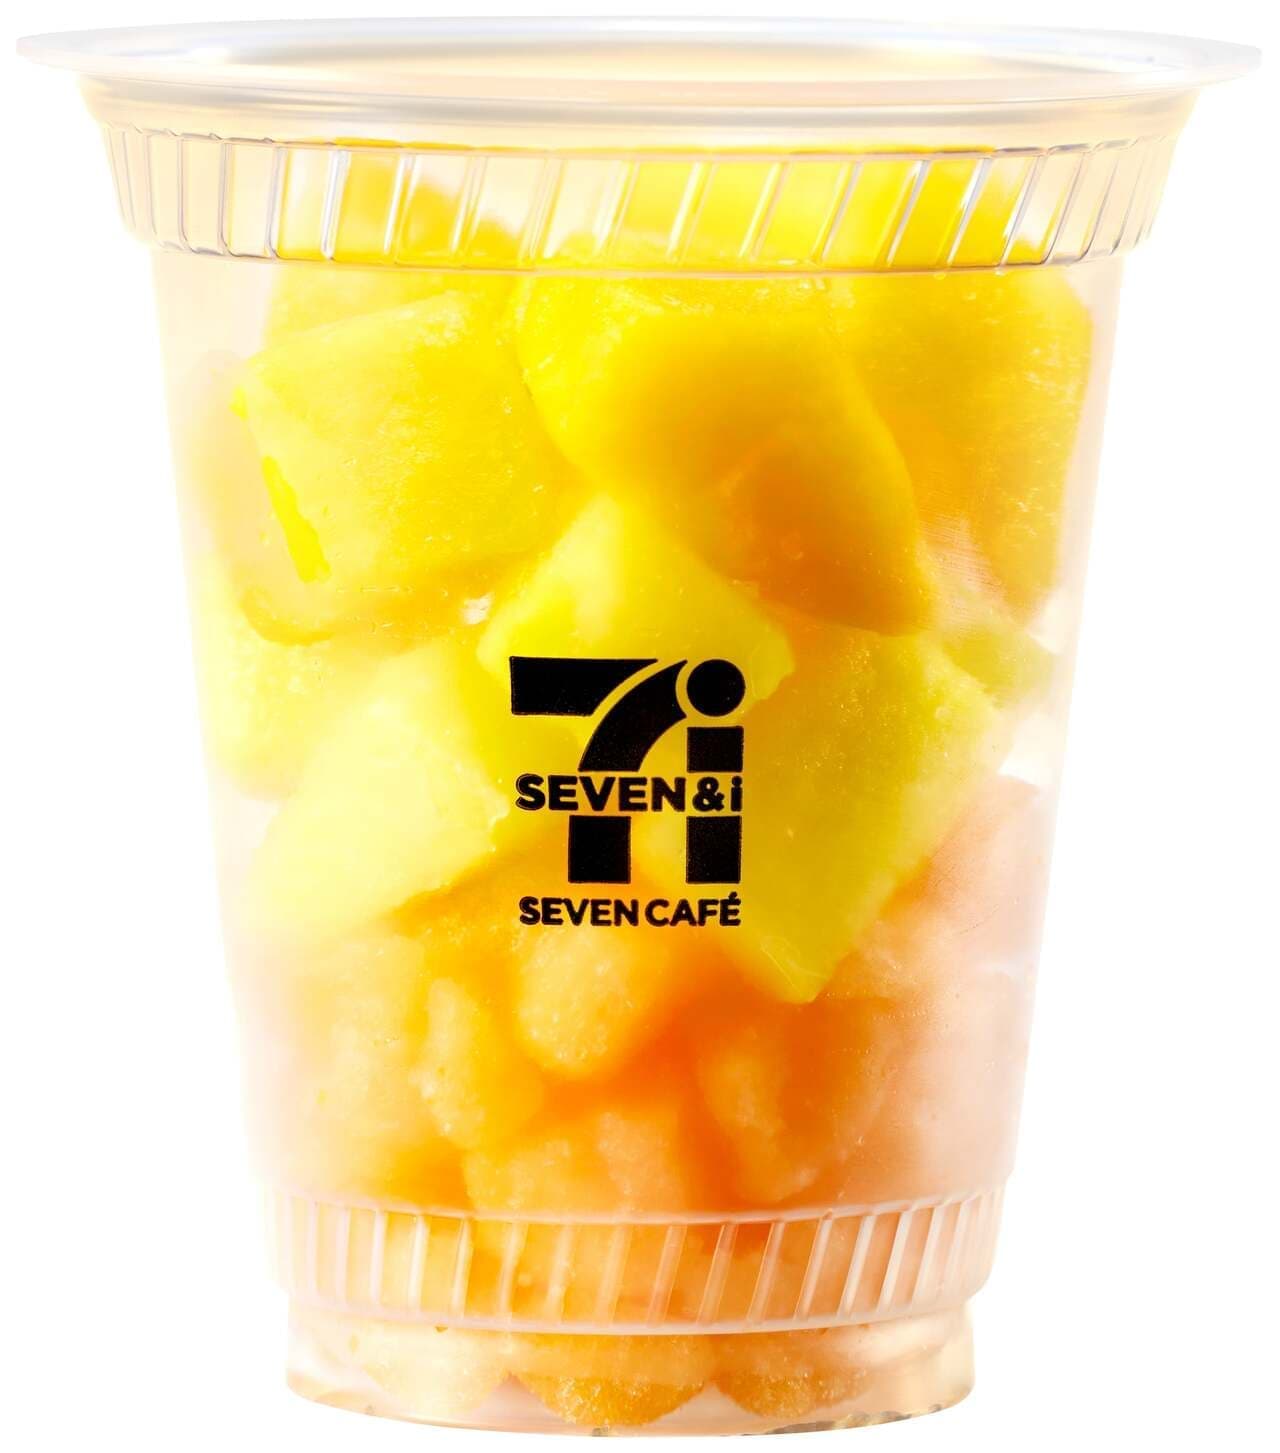 7-ELEVEN "Mango Pineapple Smoothie Made at the Store